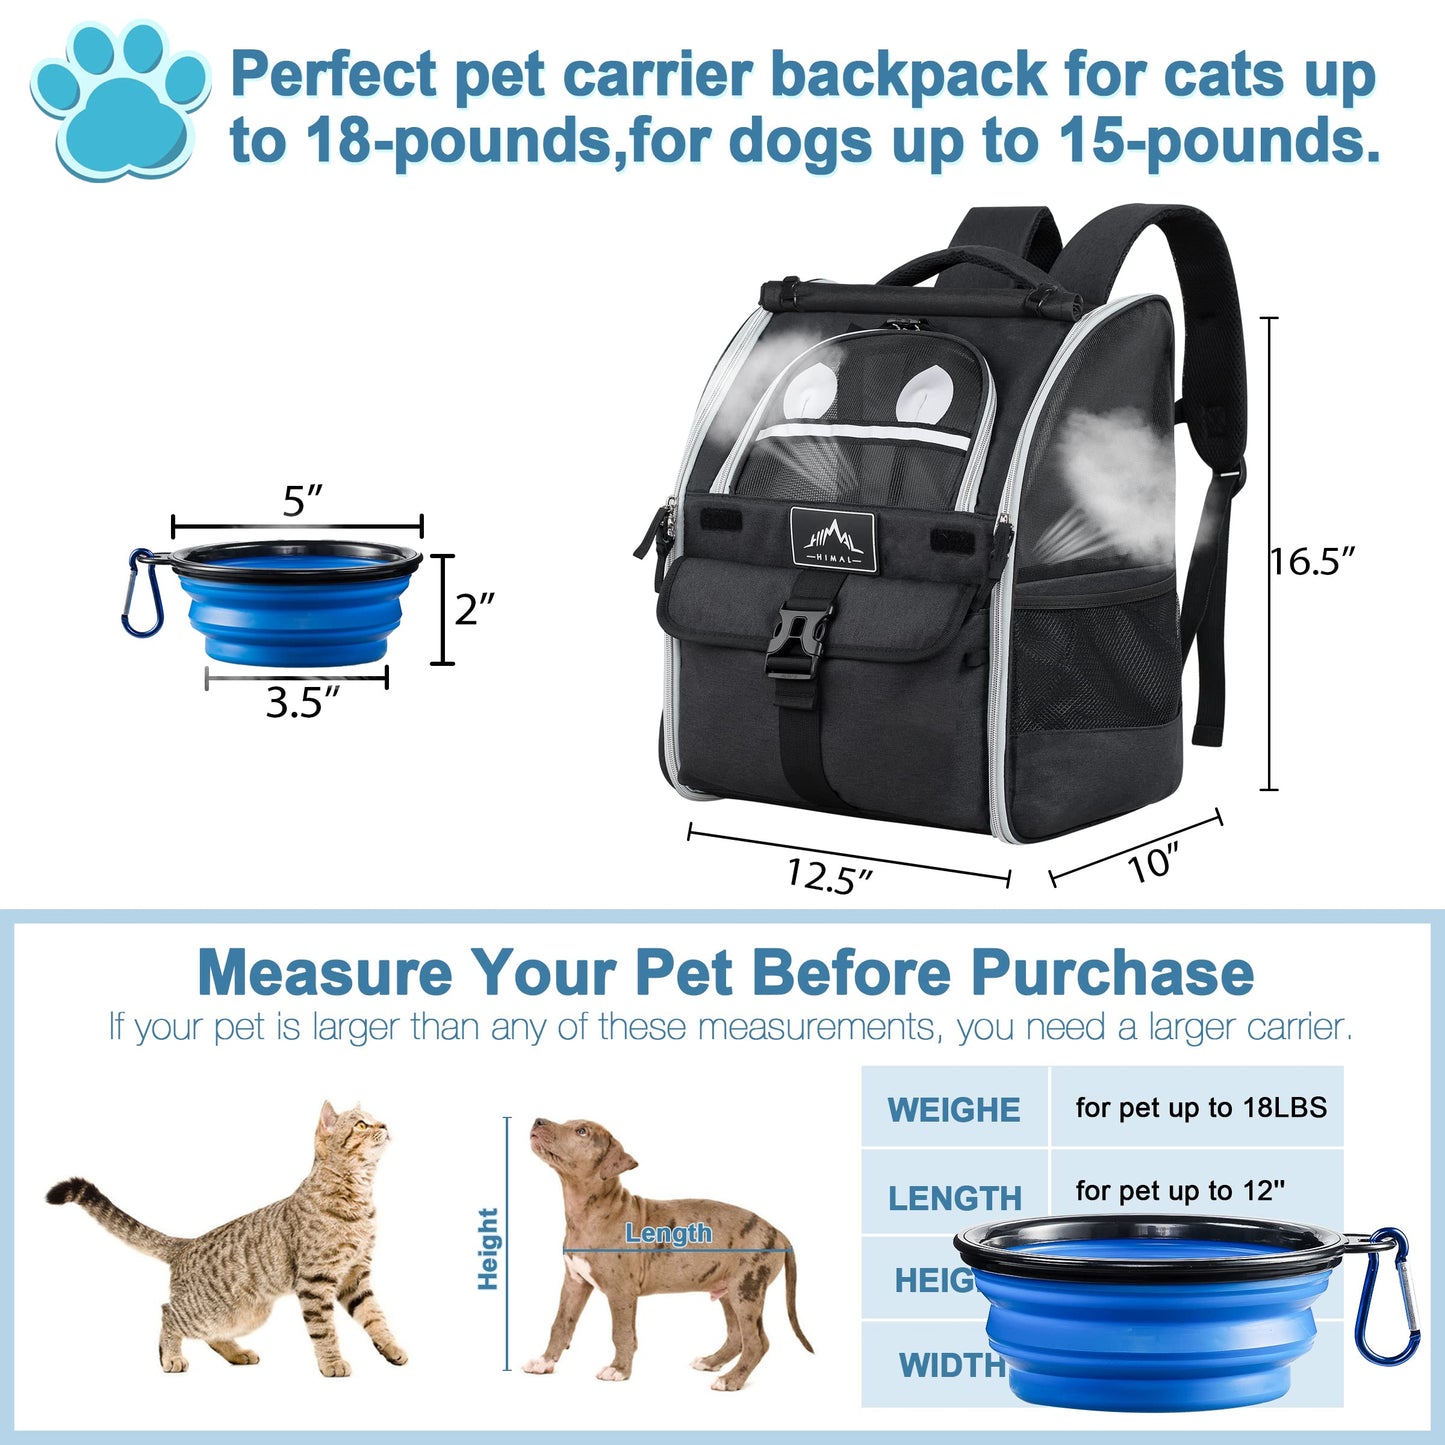 GoHimal Pet Carrier Backpack for Dogs and Cats,Puppies,Ventilated Design Breathable Dog Carrier Backpack,Cat Bag for Hiking Travel Camping Outdoor Use